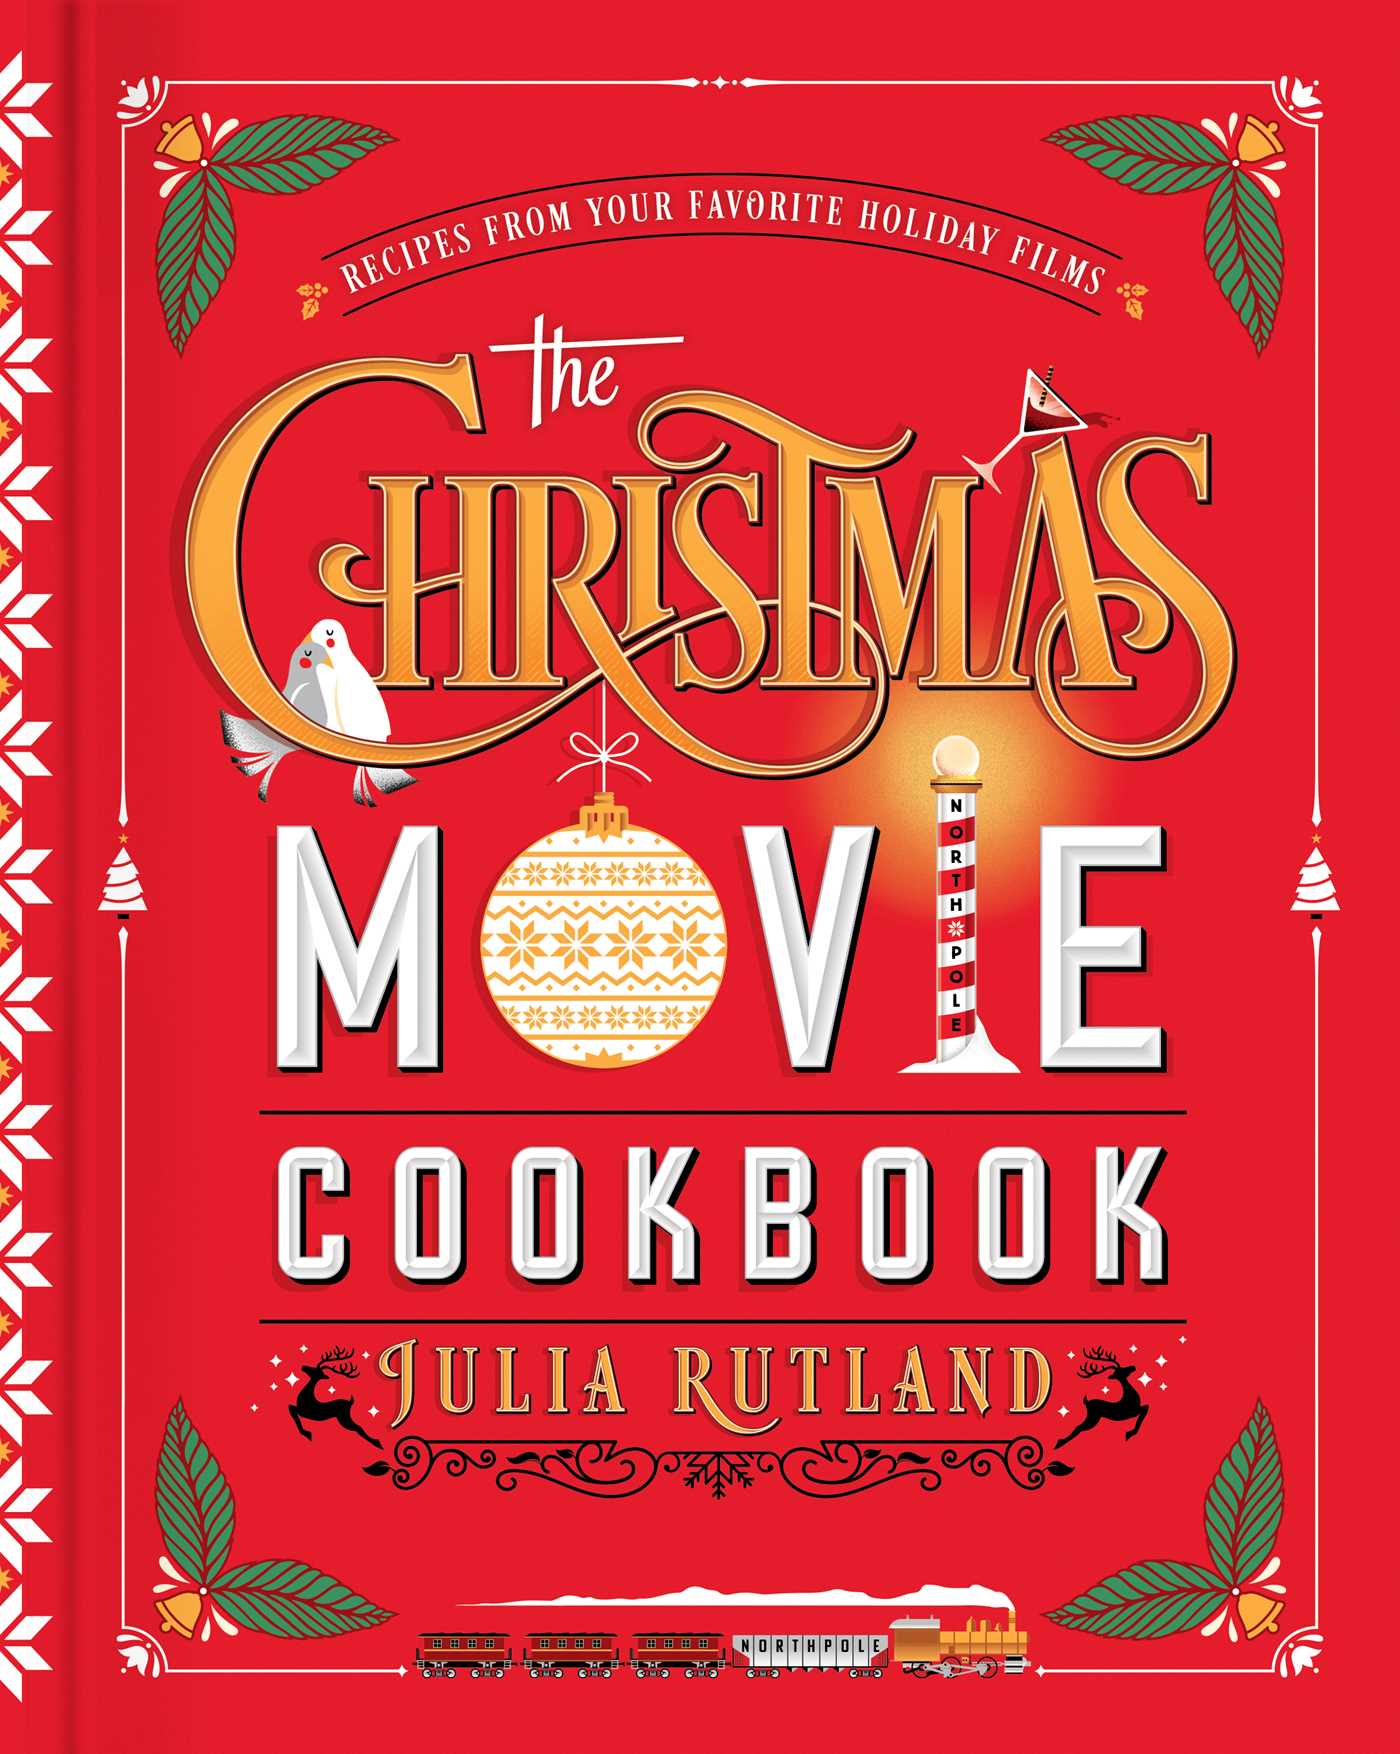 Image for "The Christmas Movie Cookbook